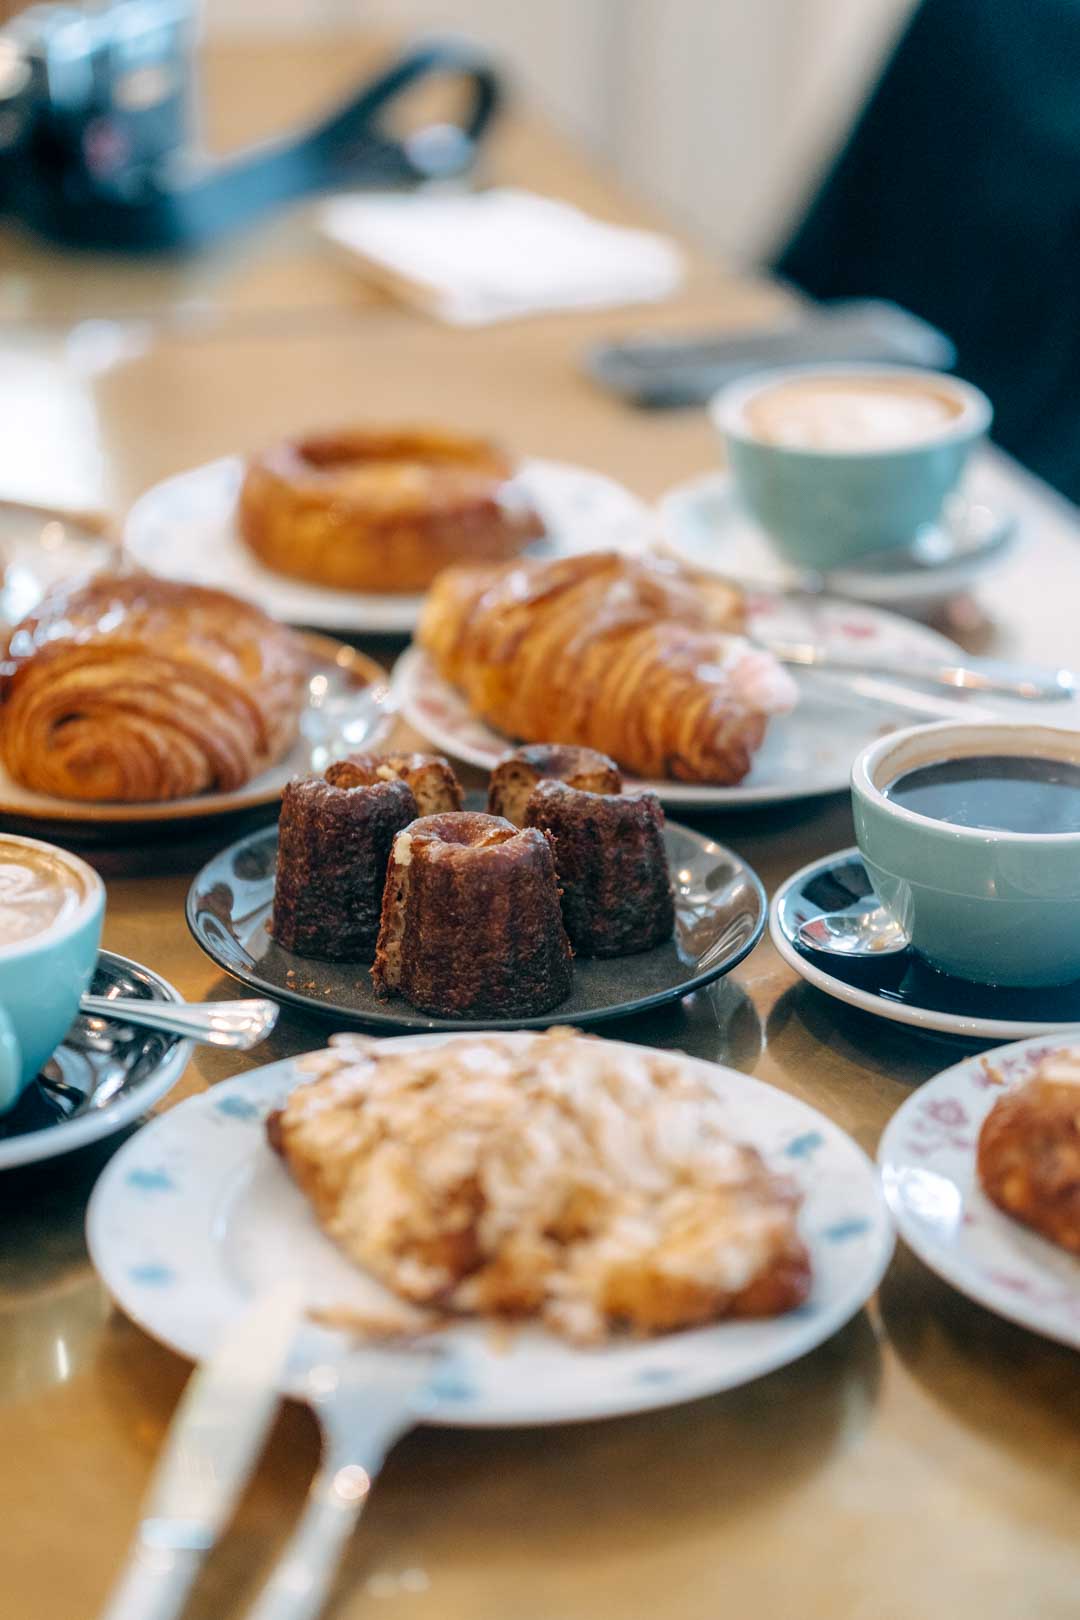 French pastries including croissants and canele at a bakery in Singapore